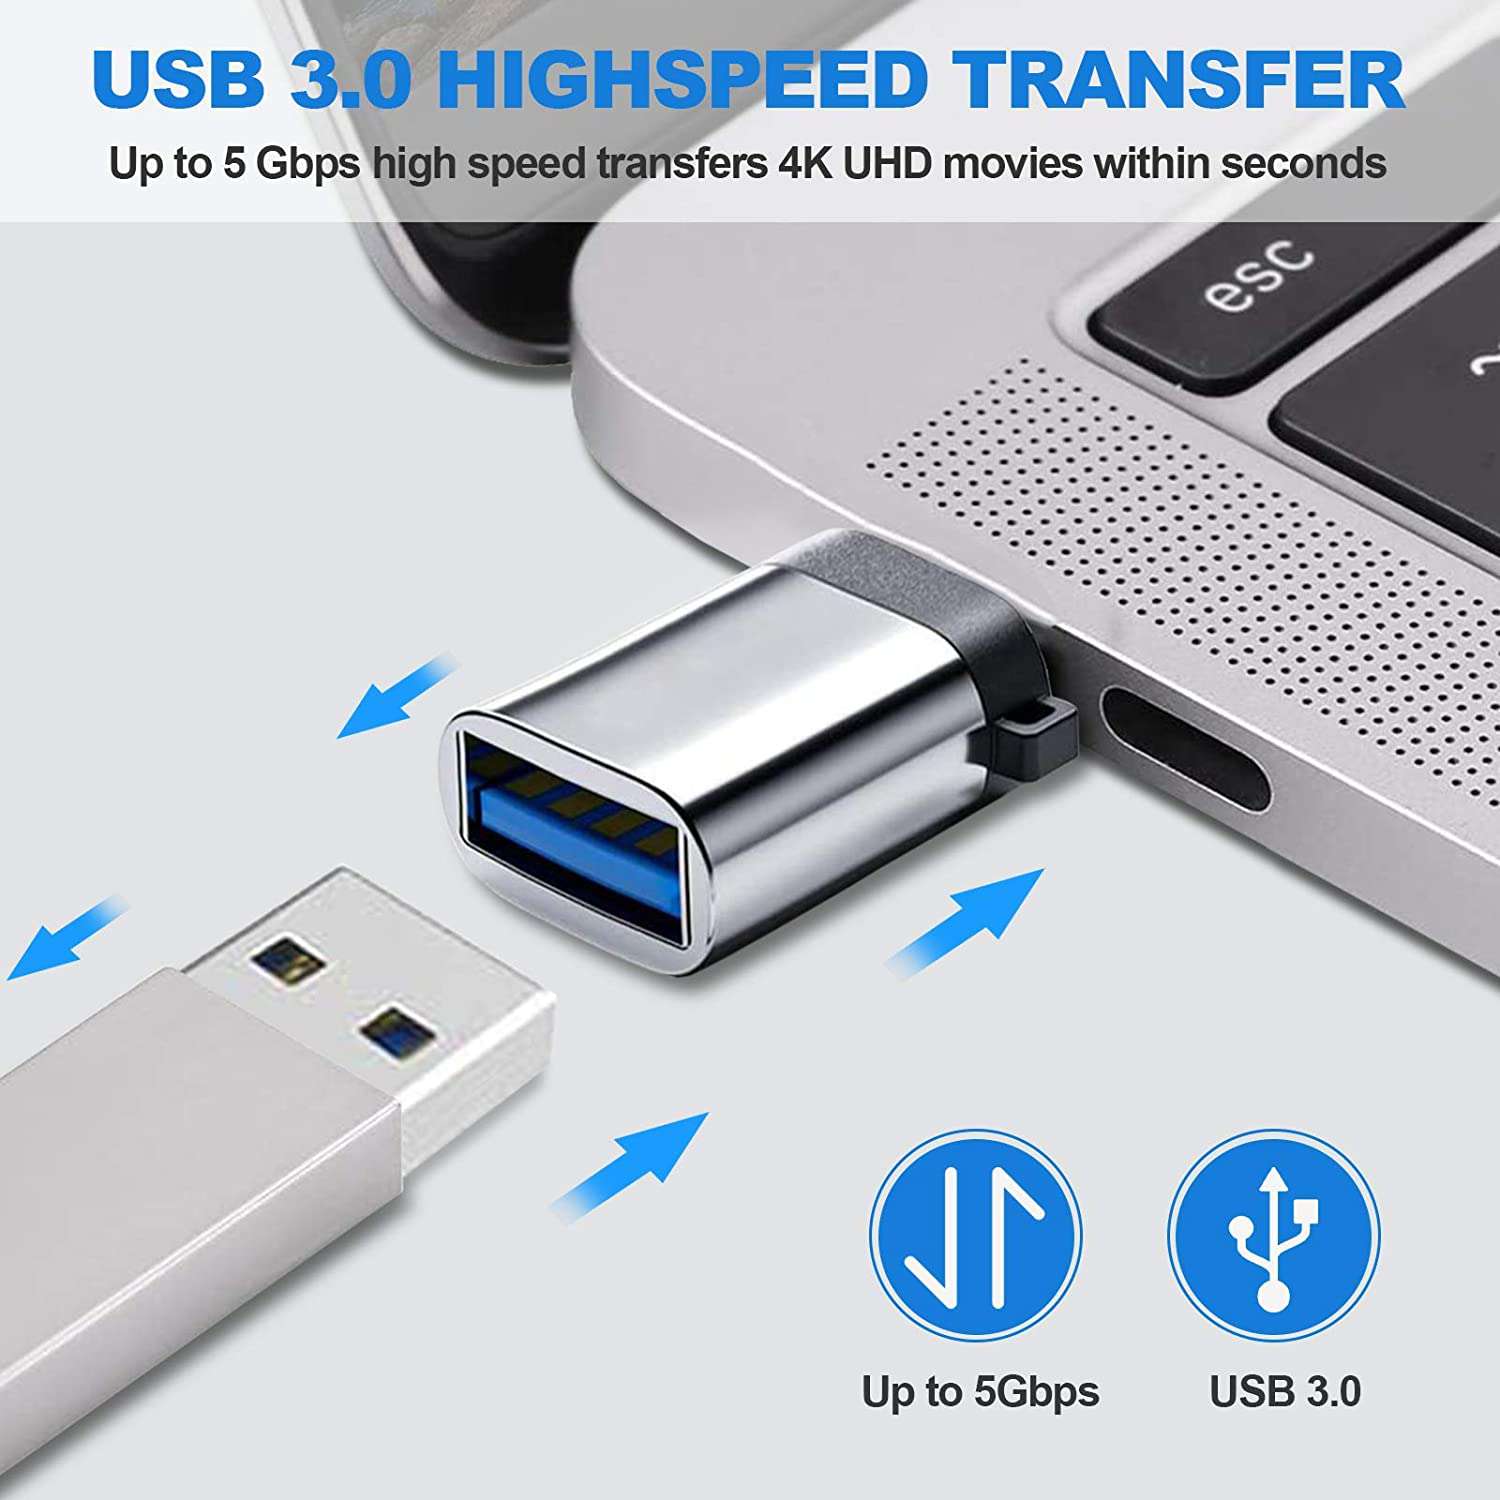 USB 3.0 adapter transfers 4K HD video at 5Gbps